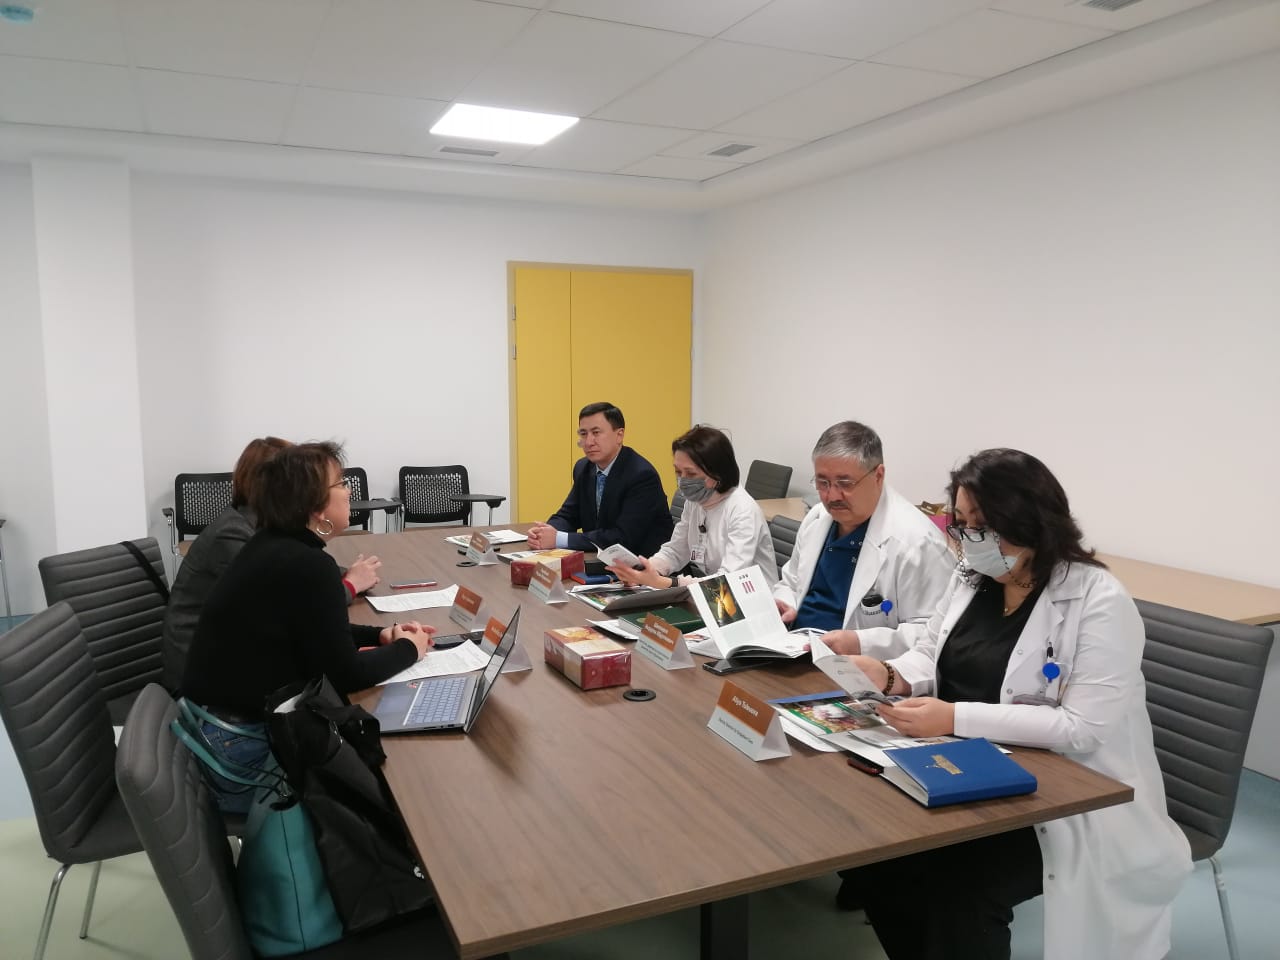 REPRESENTATIVES OF THE PARTNER CLINIC “MEDICAL CONCERN ASKLEPIOS (GERMANY)” VISITED THE MEDICAL CENTER HOSPITAL OF THE PRESIDENT’S AFFAIRS ADMINISTRATION OF THE REPUBLIC OF KAZAKHSTAN